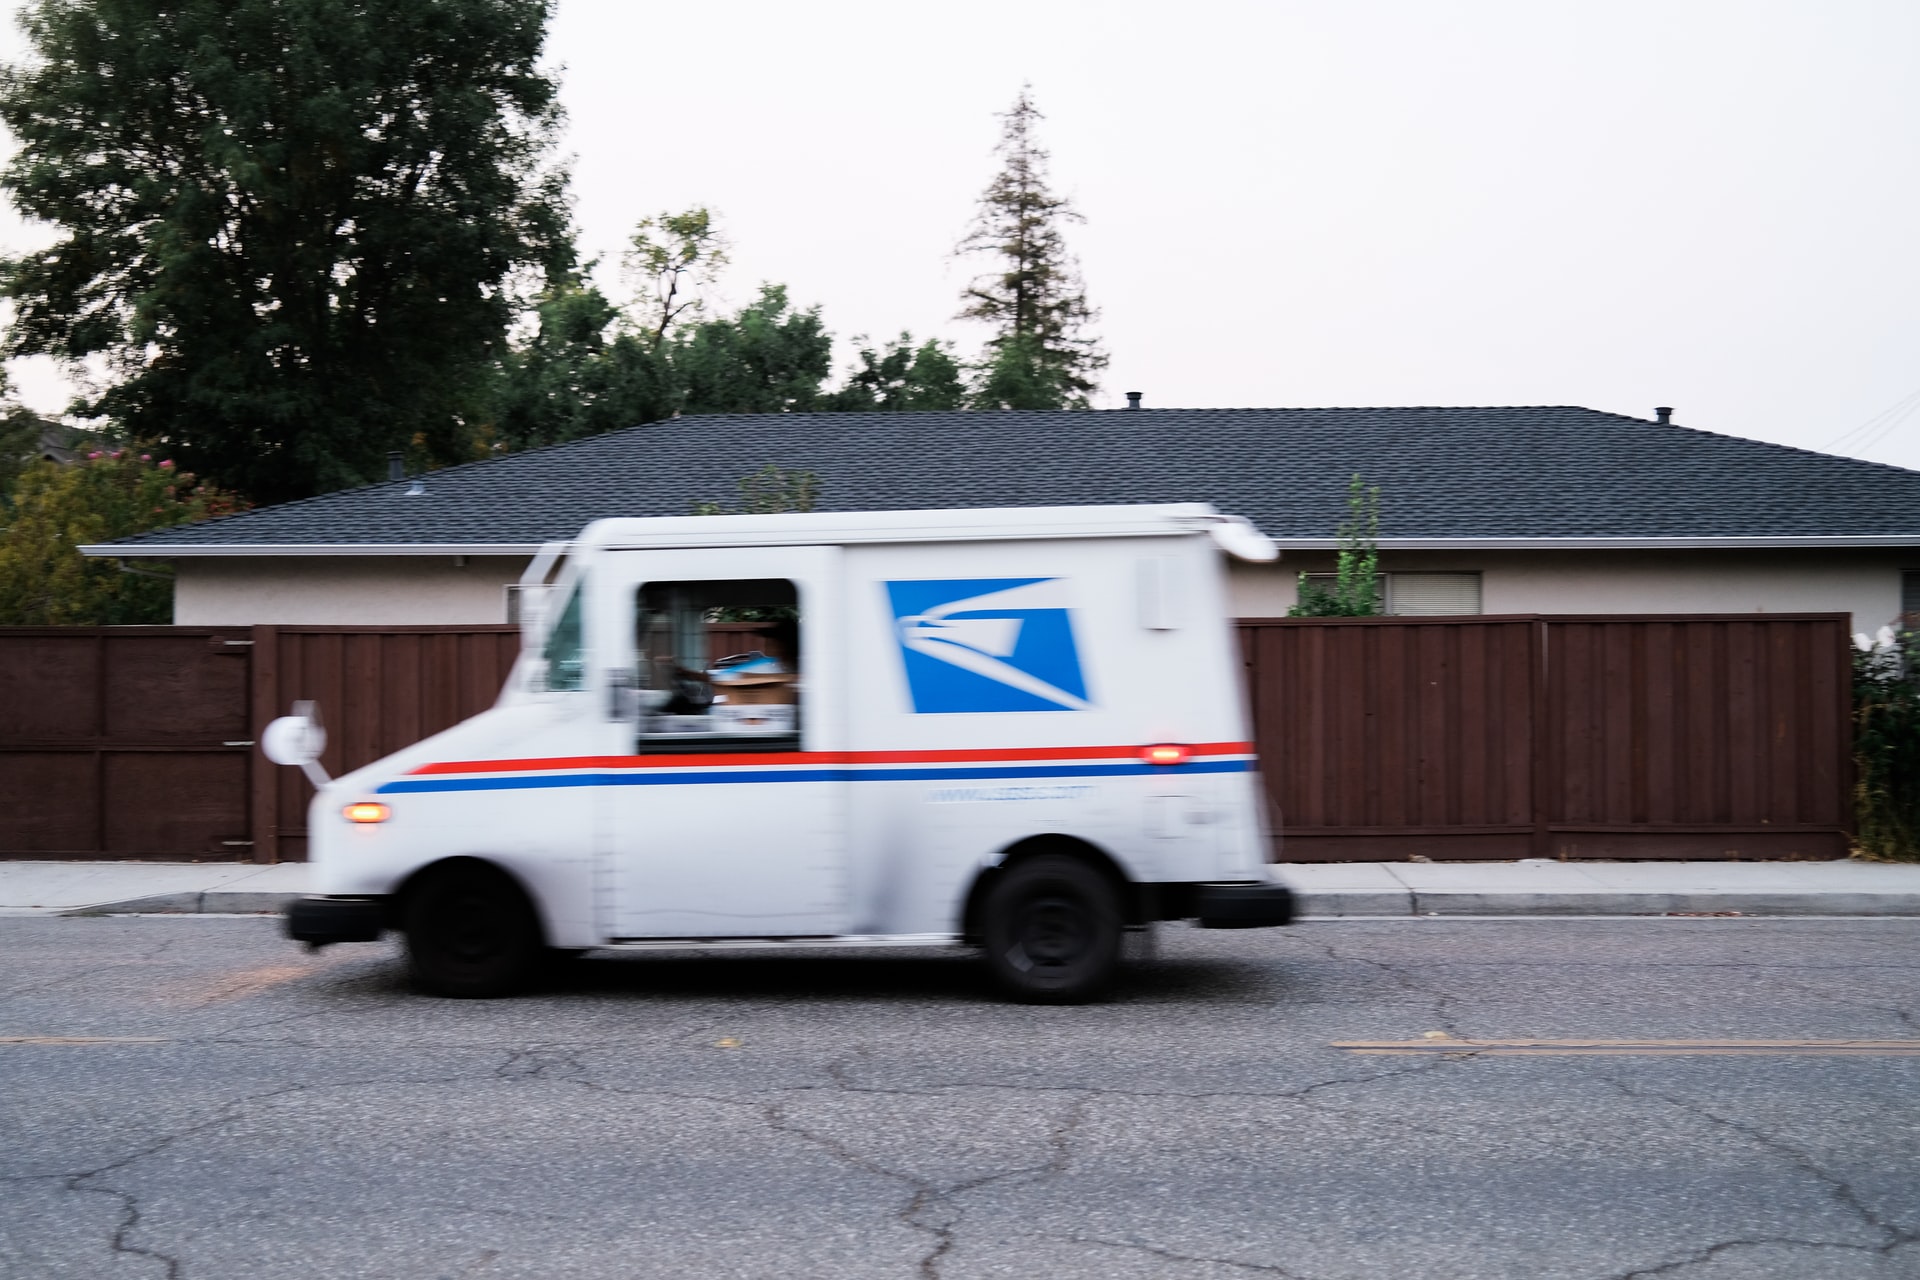 On November 10, 2021 the USPS filed notice with the Postal Regulatory Commission (PRC) of shipping changes that would take effect on January 9, 2022.